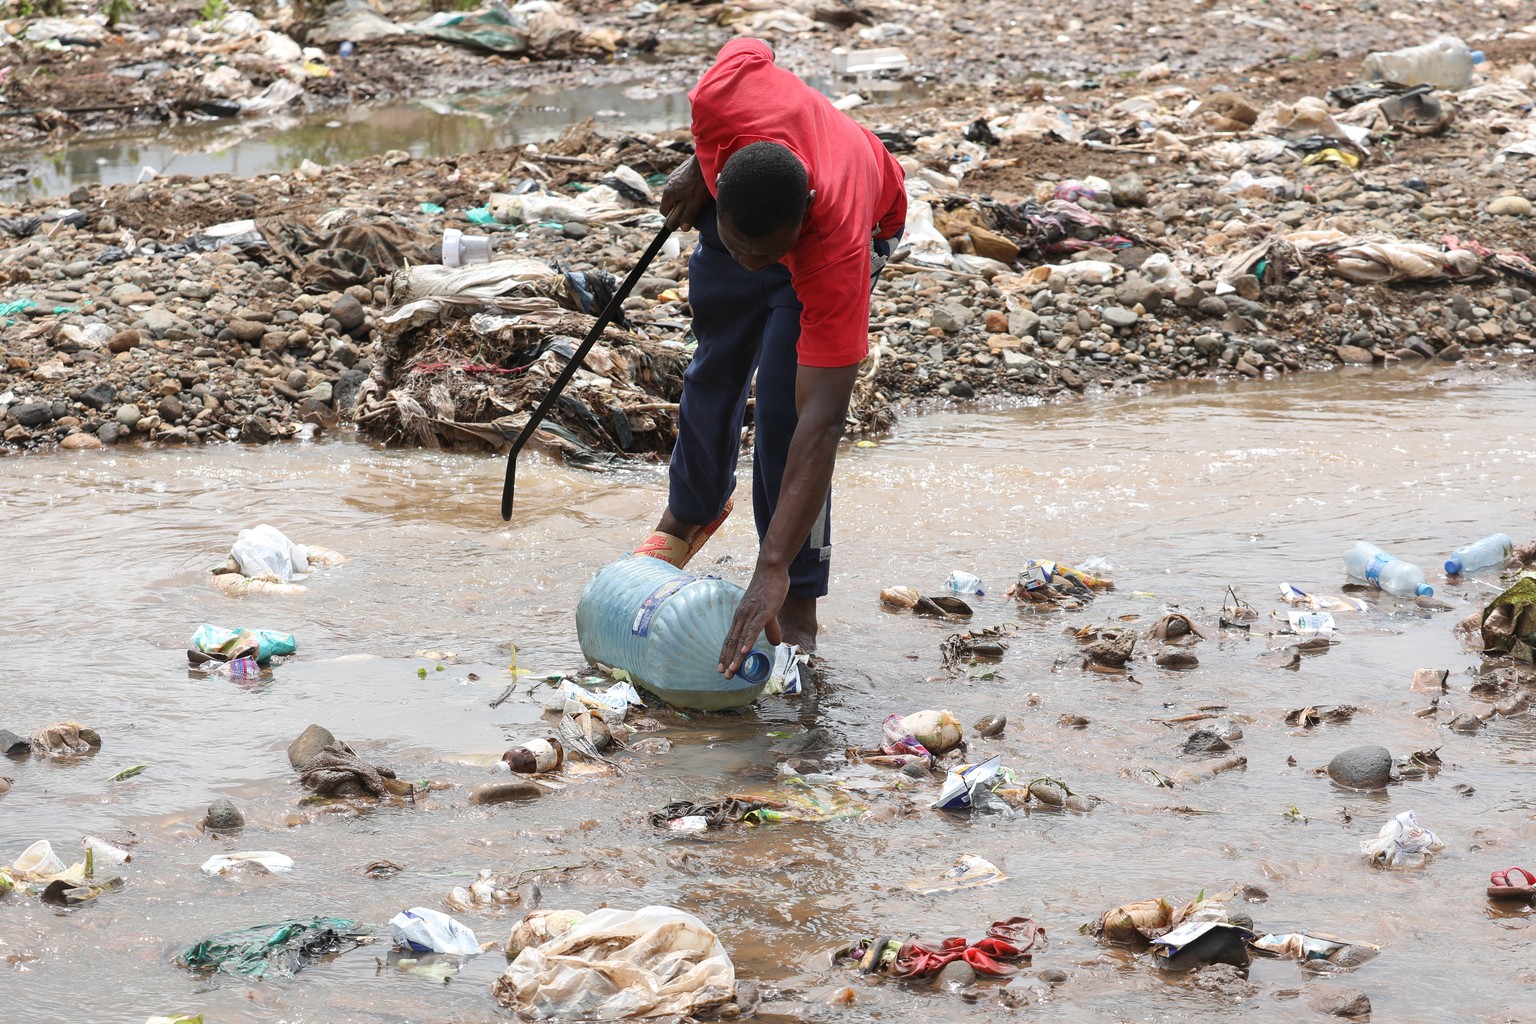 epa06762122 A volunteer collects plastic waste during a clean-up exercise organised by UN Environment near the Nairobi Dam in Kibera slum, Nairobi, Kenya, 25 May 2018. A clean-up and tree-planting eve ...